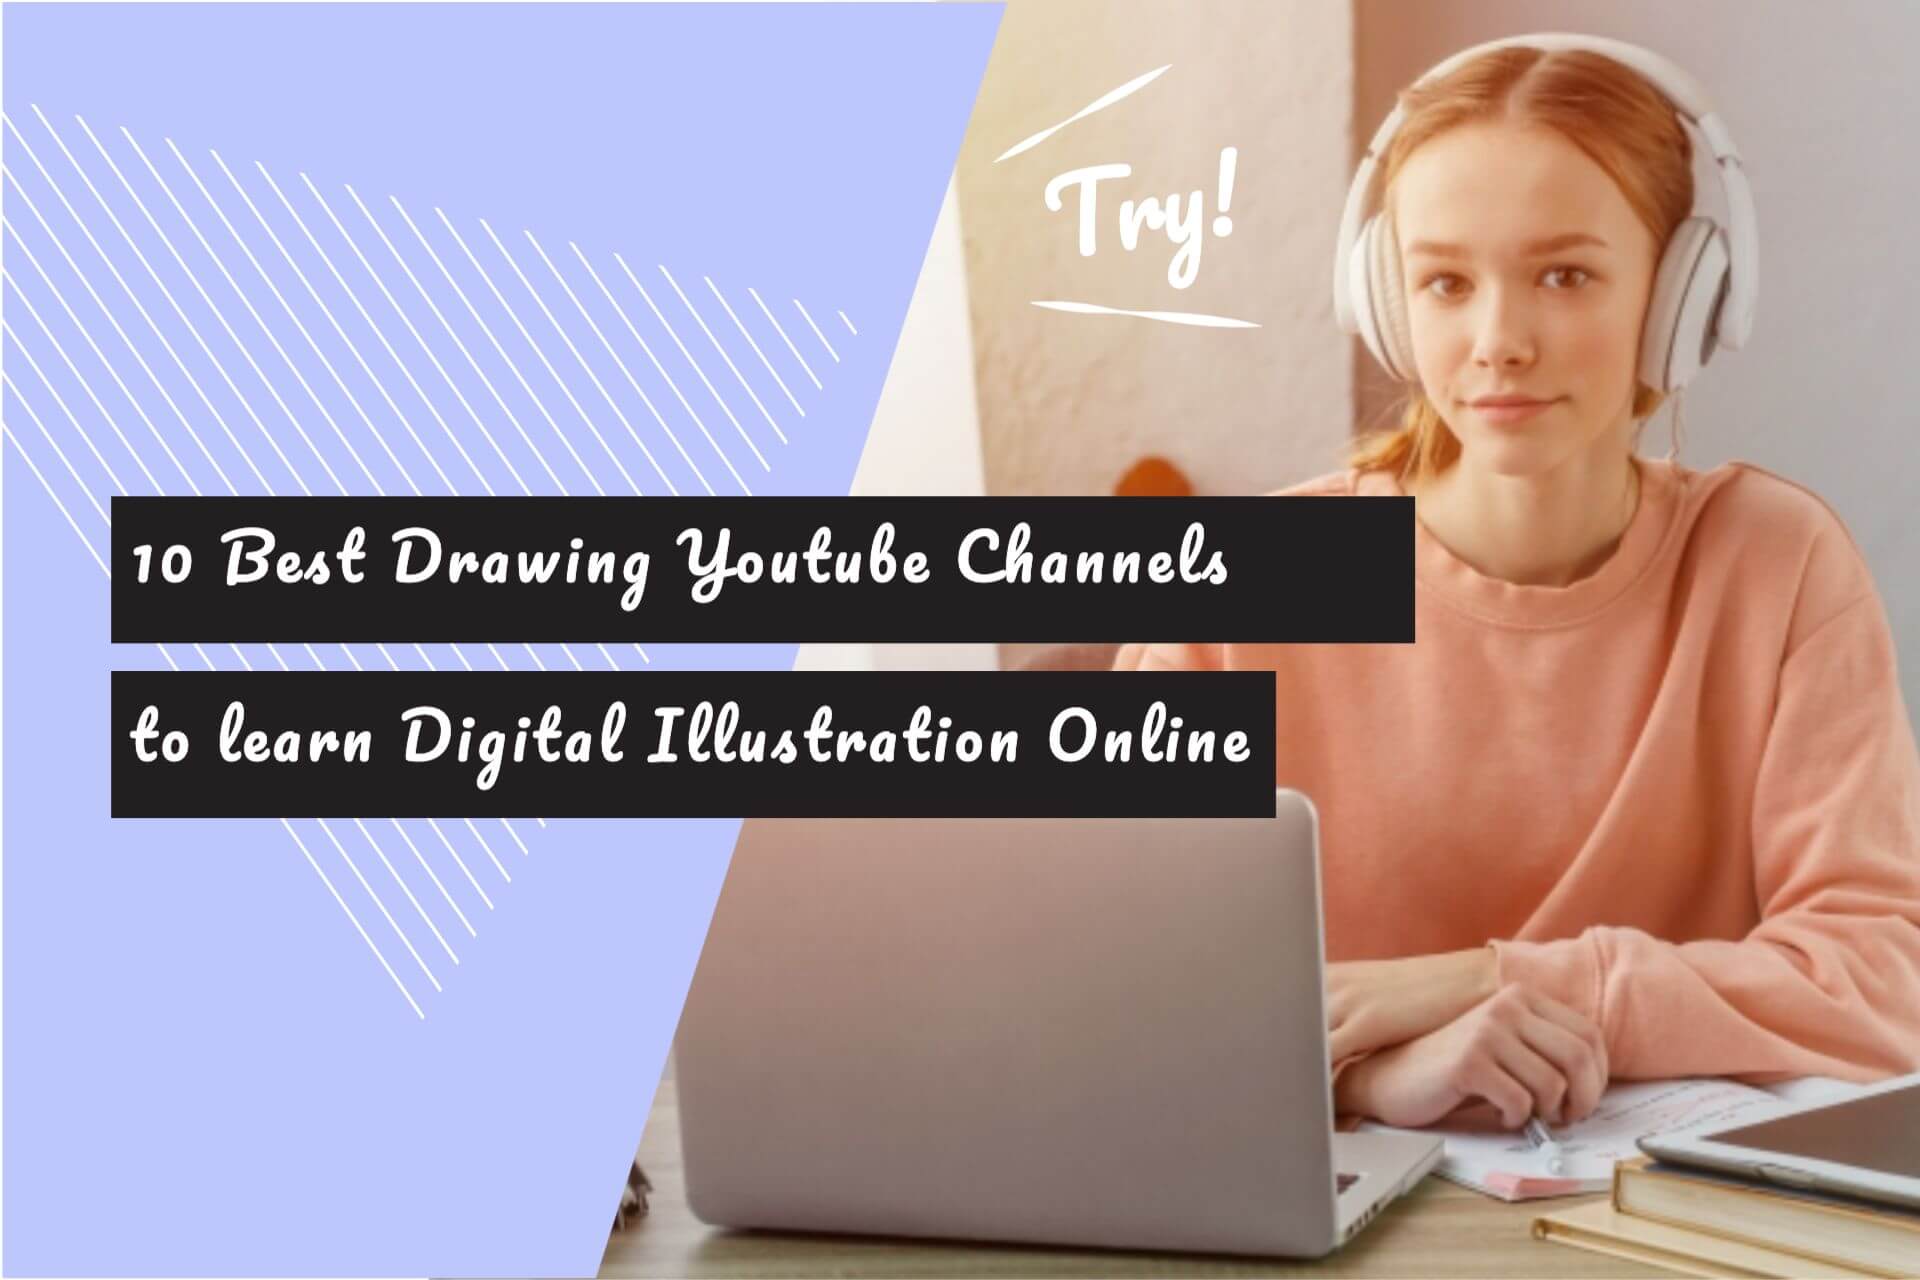 10 Best Drawing Youtube Channels to learn Digital Illustration Online